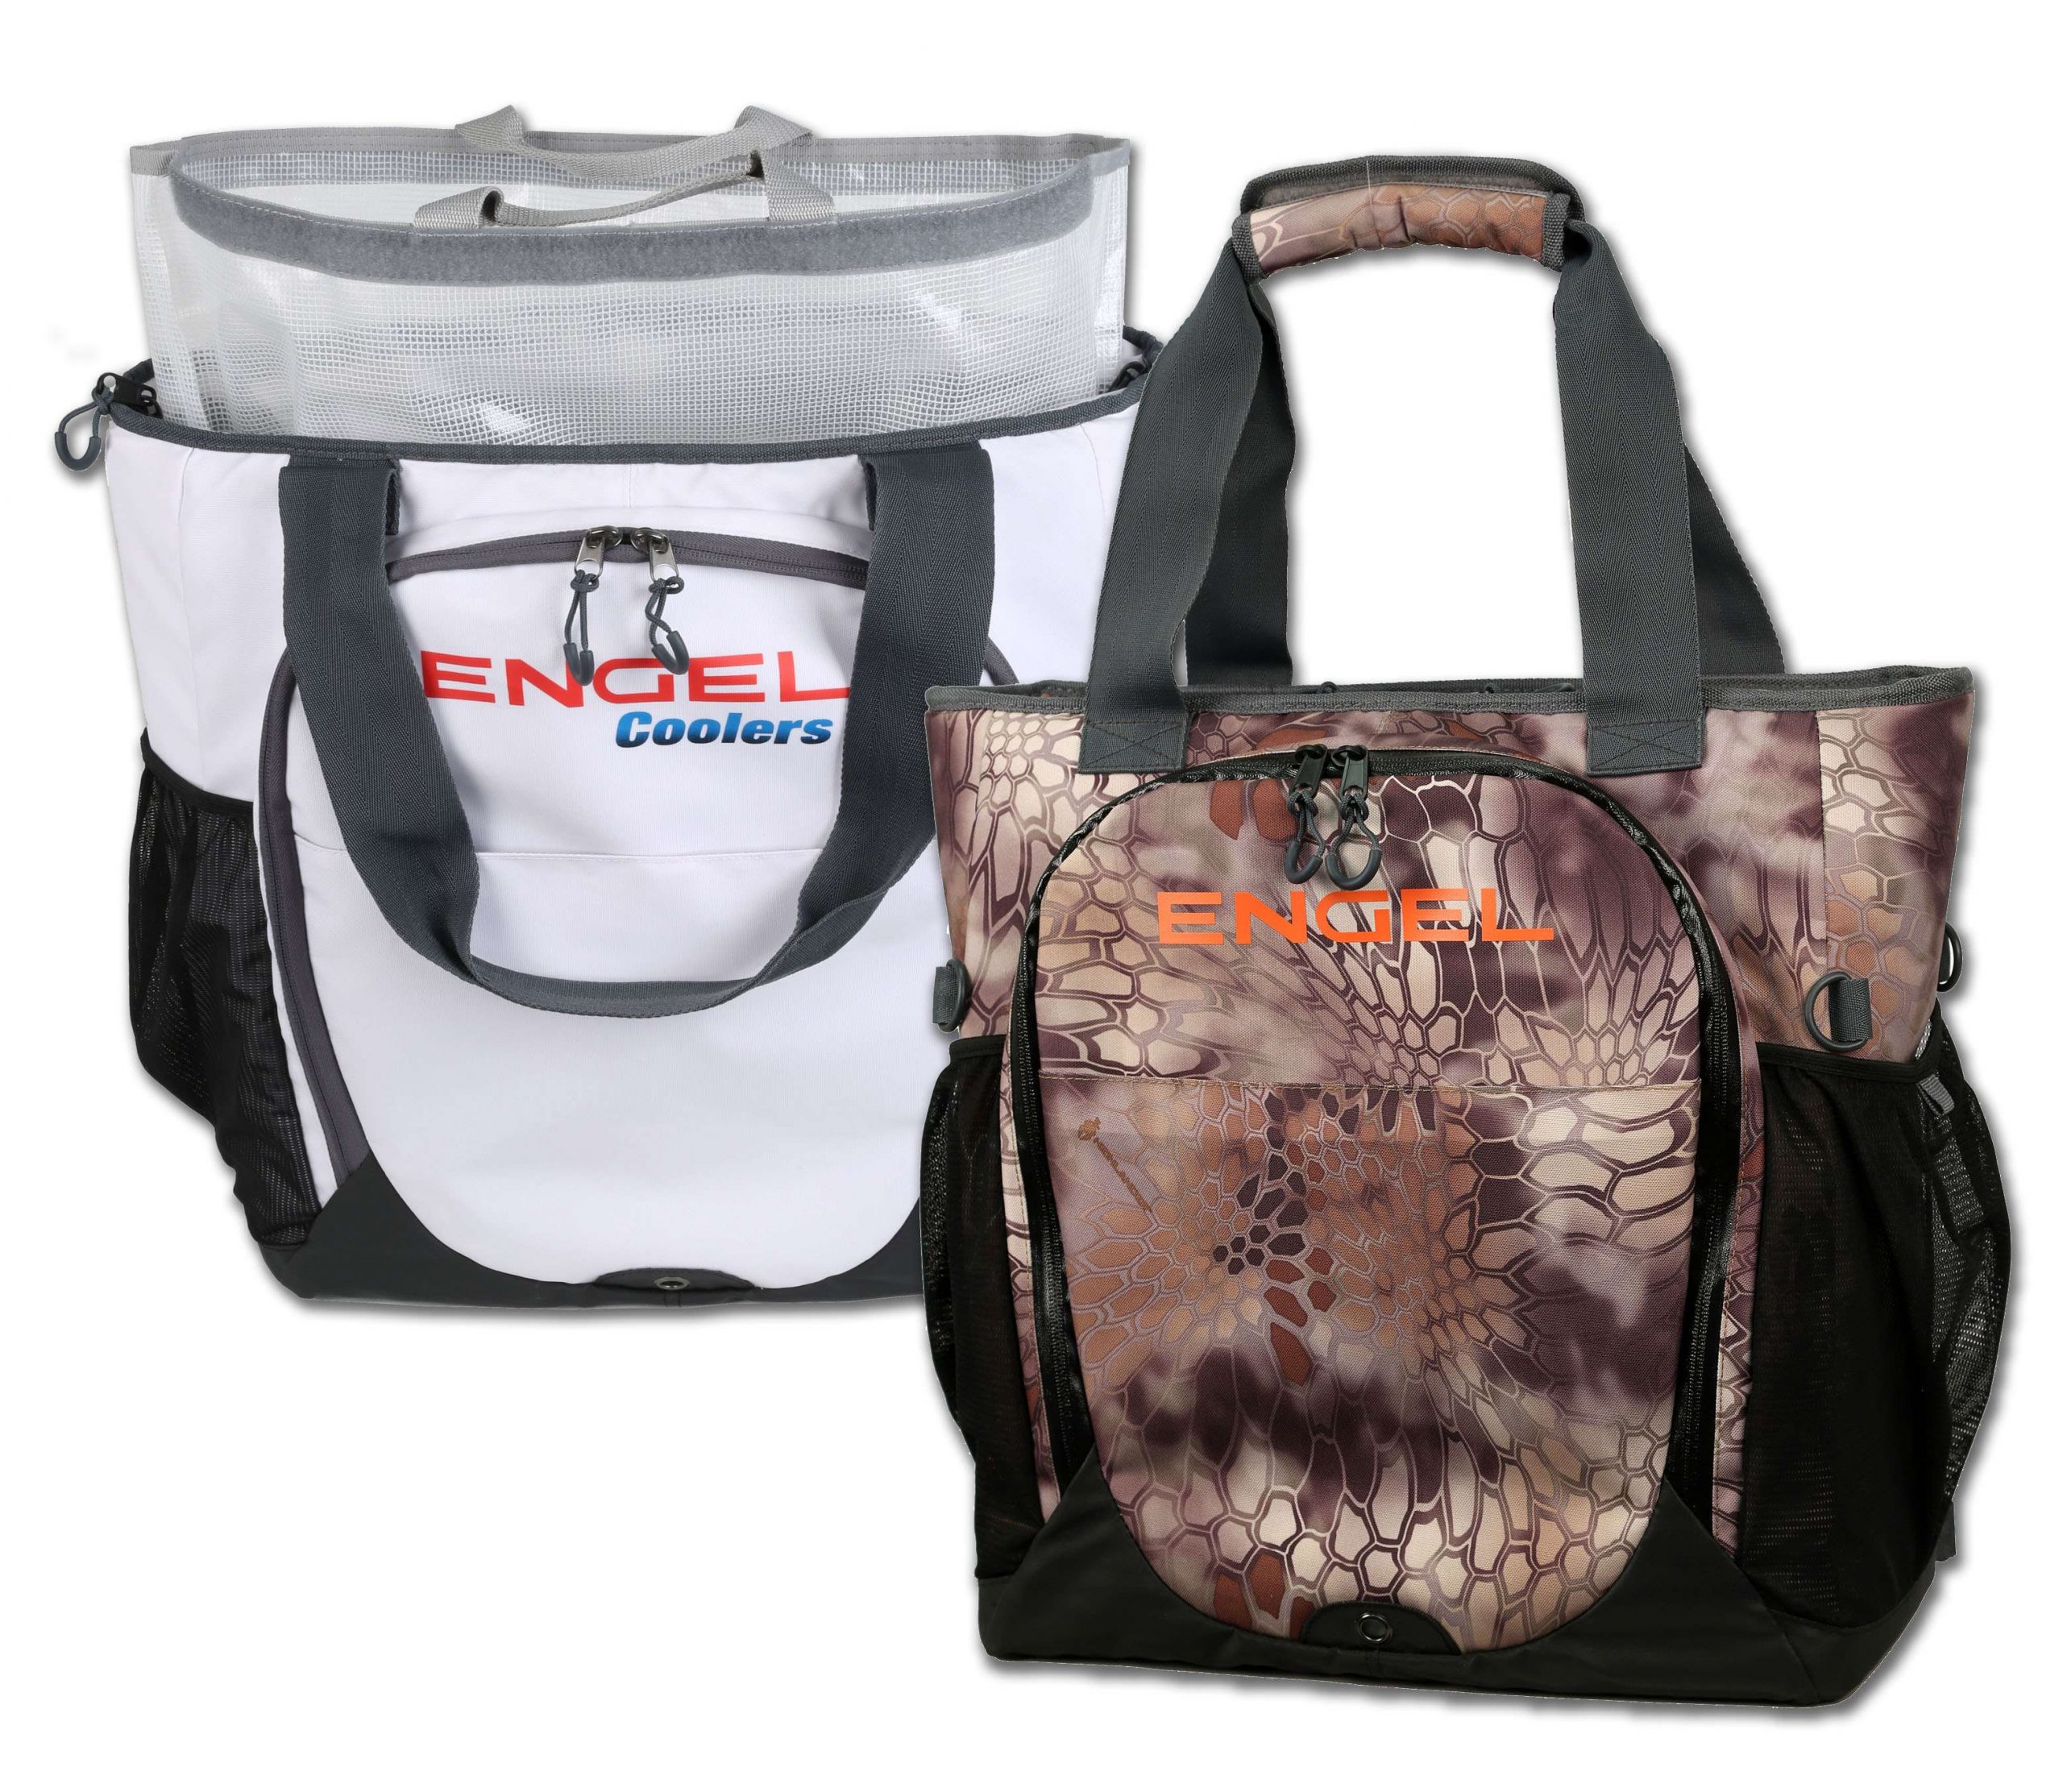 <b>Engel</b><br>	Cooler Backpack<br>	This backpack will keep ice cold for three days due to its advanced liner bag that's puncture-resistant and has anti-microbial protection. There's also a 